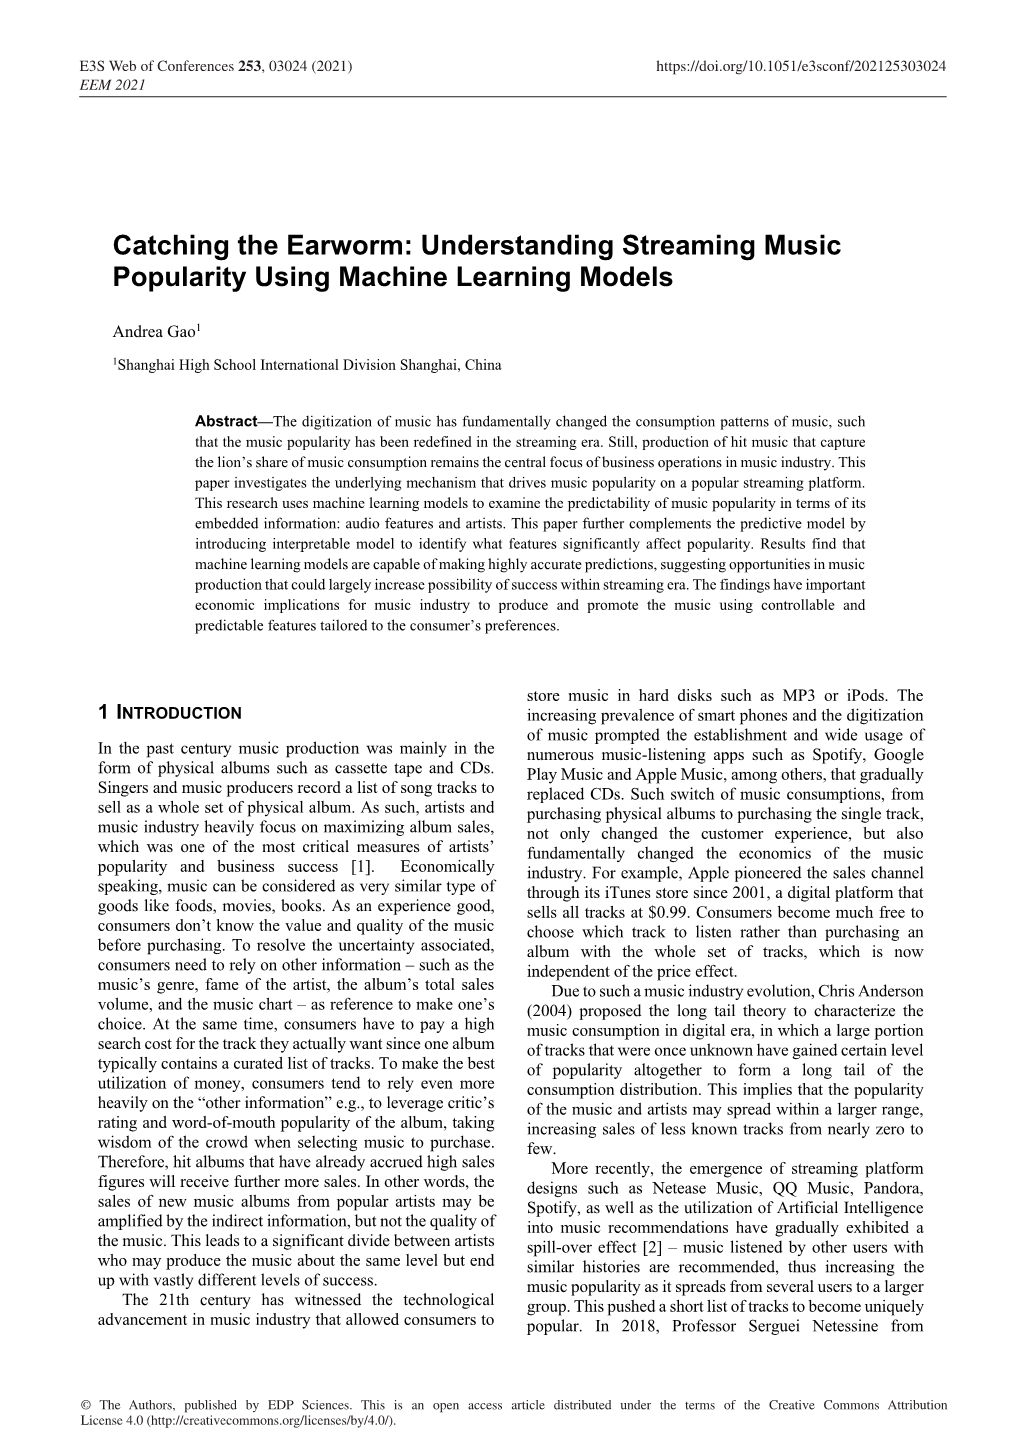 Understanding Streaming Music Popularity Using Machine Learning Models